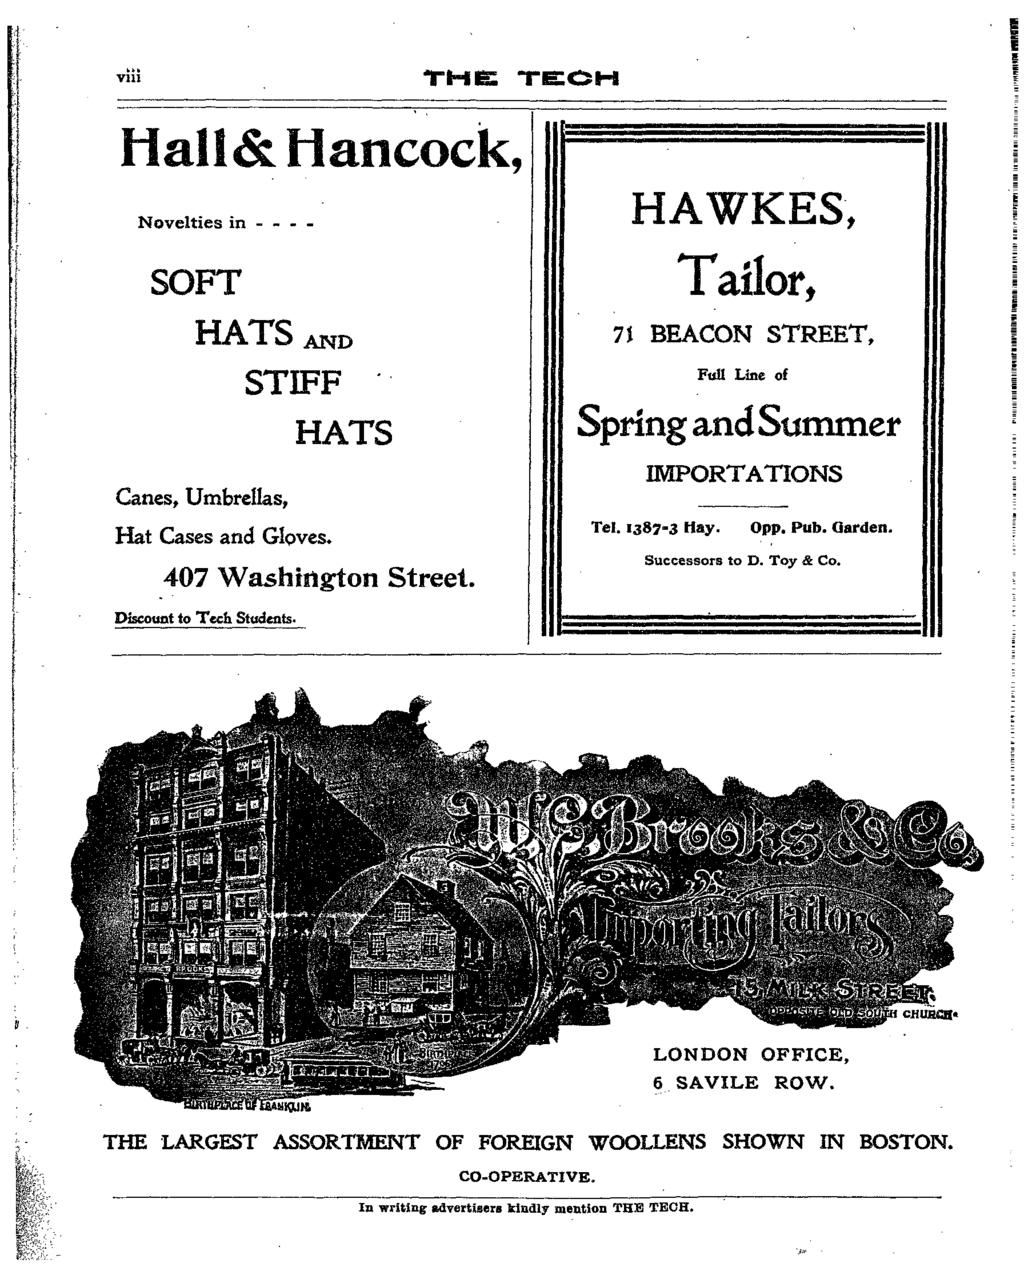 f TH-E Hall& Hancock, Noveltes n - - - - SOFT HATS AND STFF HATS Canes, mbrellas, Hat Cases and Gloves. 407 Washngton Street. Dscount to Tech Students.